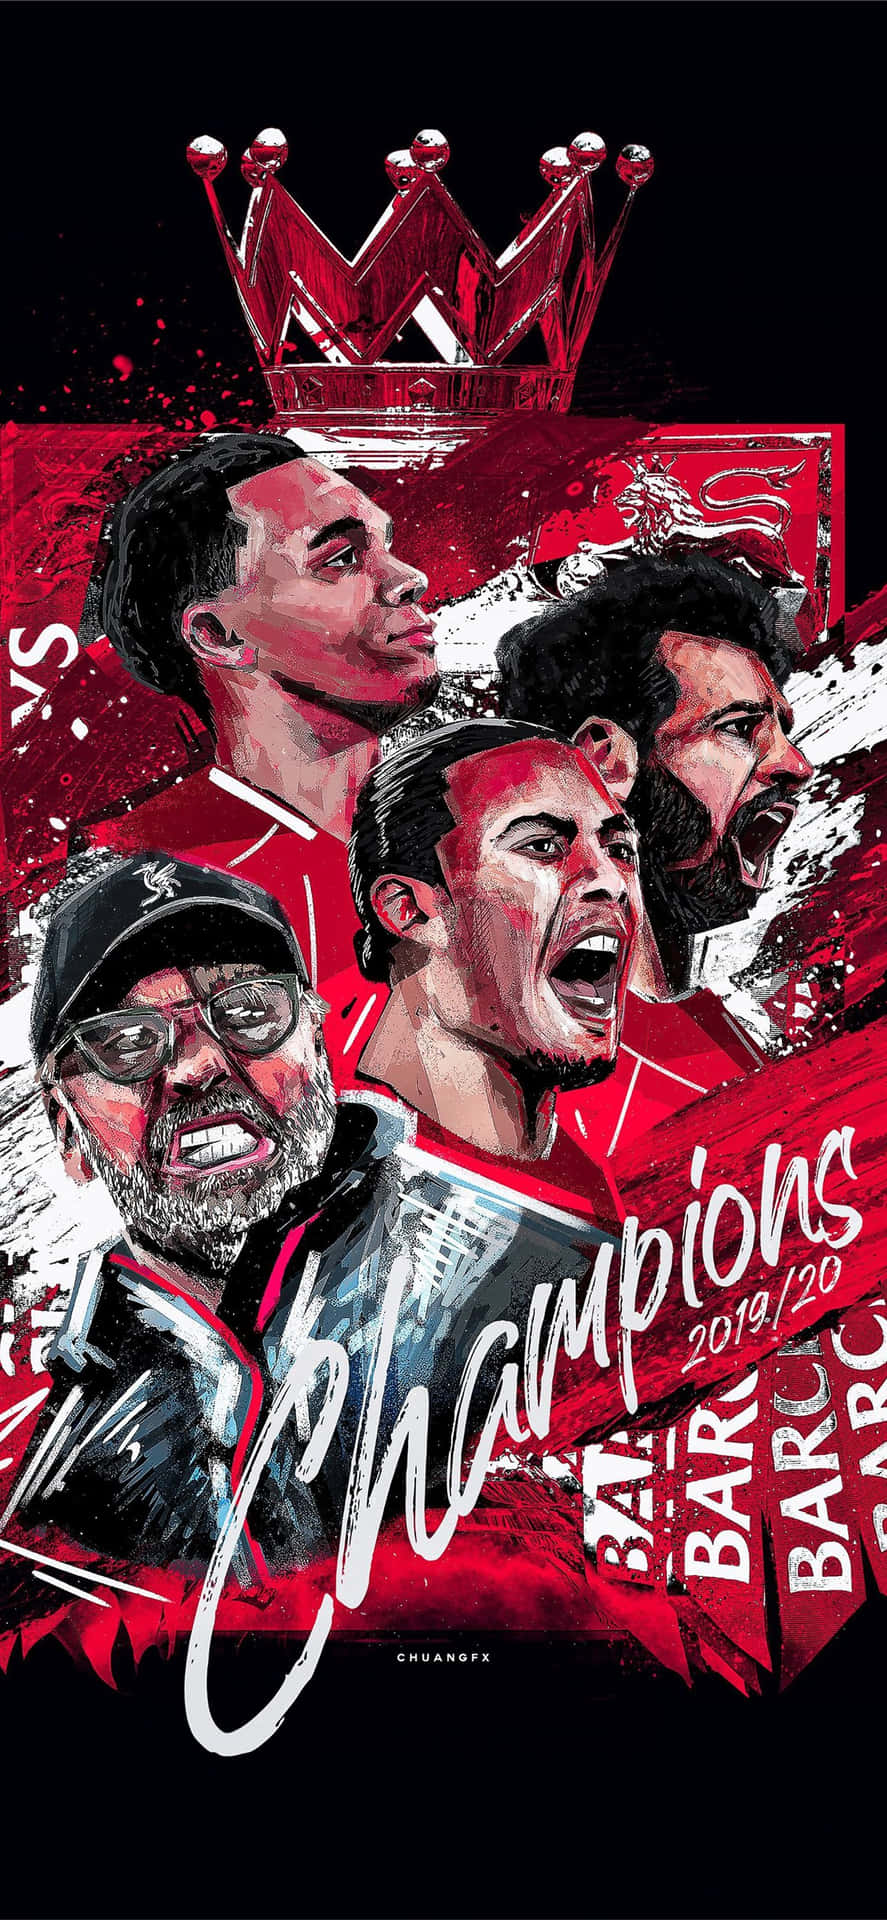 1.  Show off your support for Liverpool with a new iPhone Wallpaper